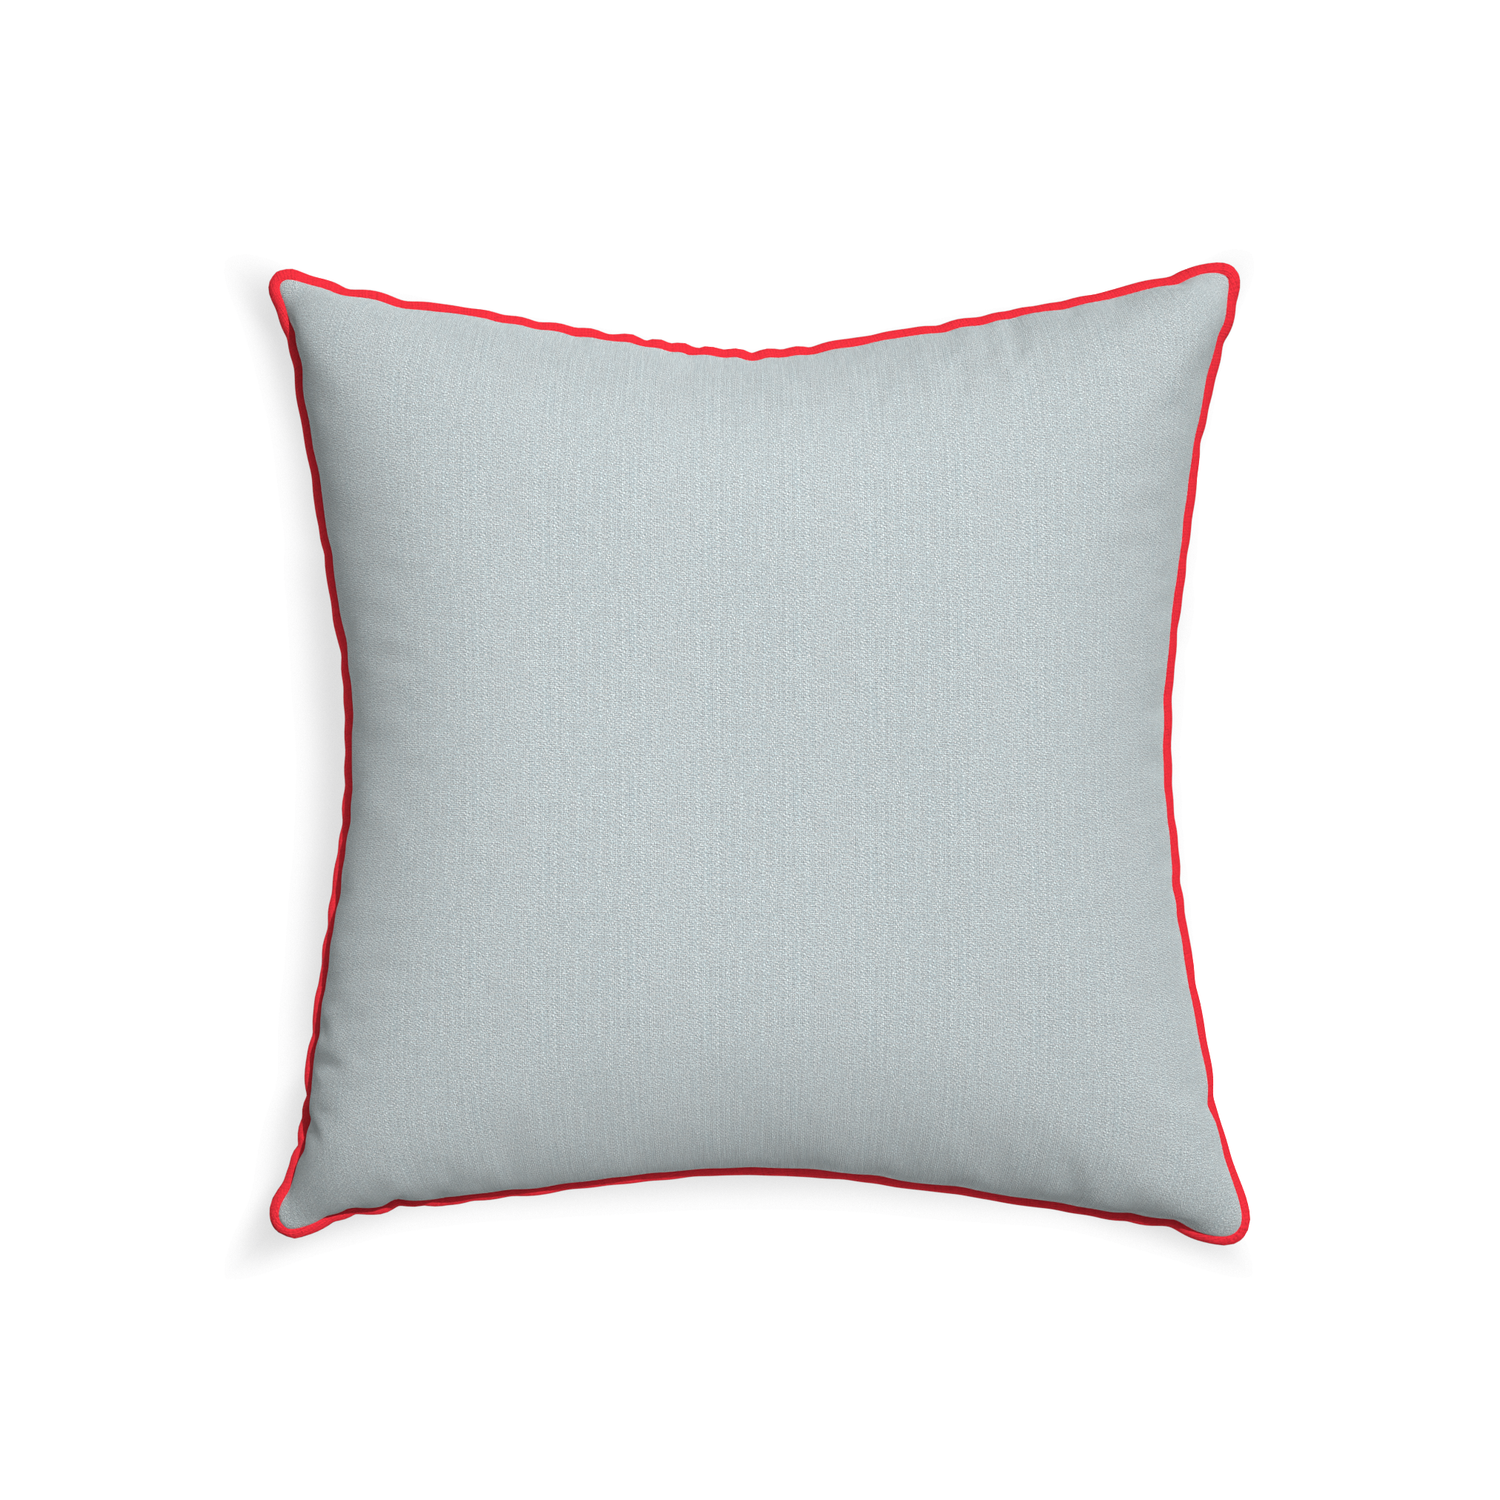 22-square sea custom grey bluepillow with cherry piping on white background